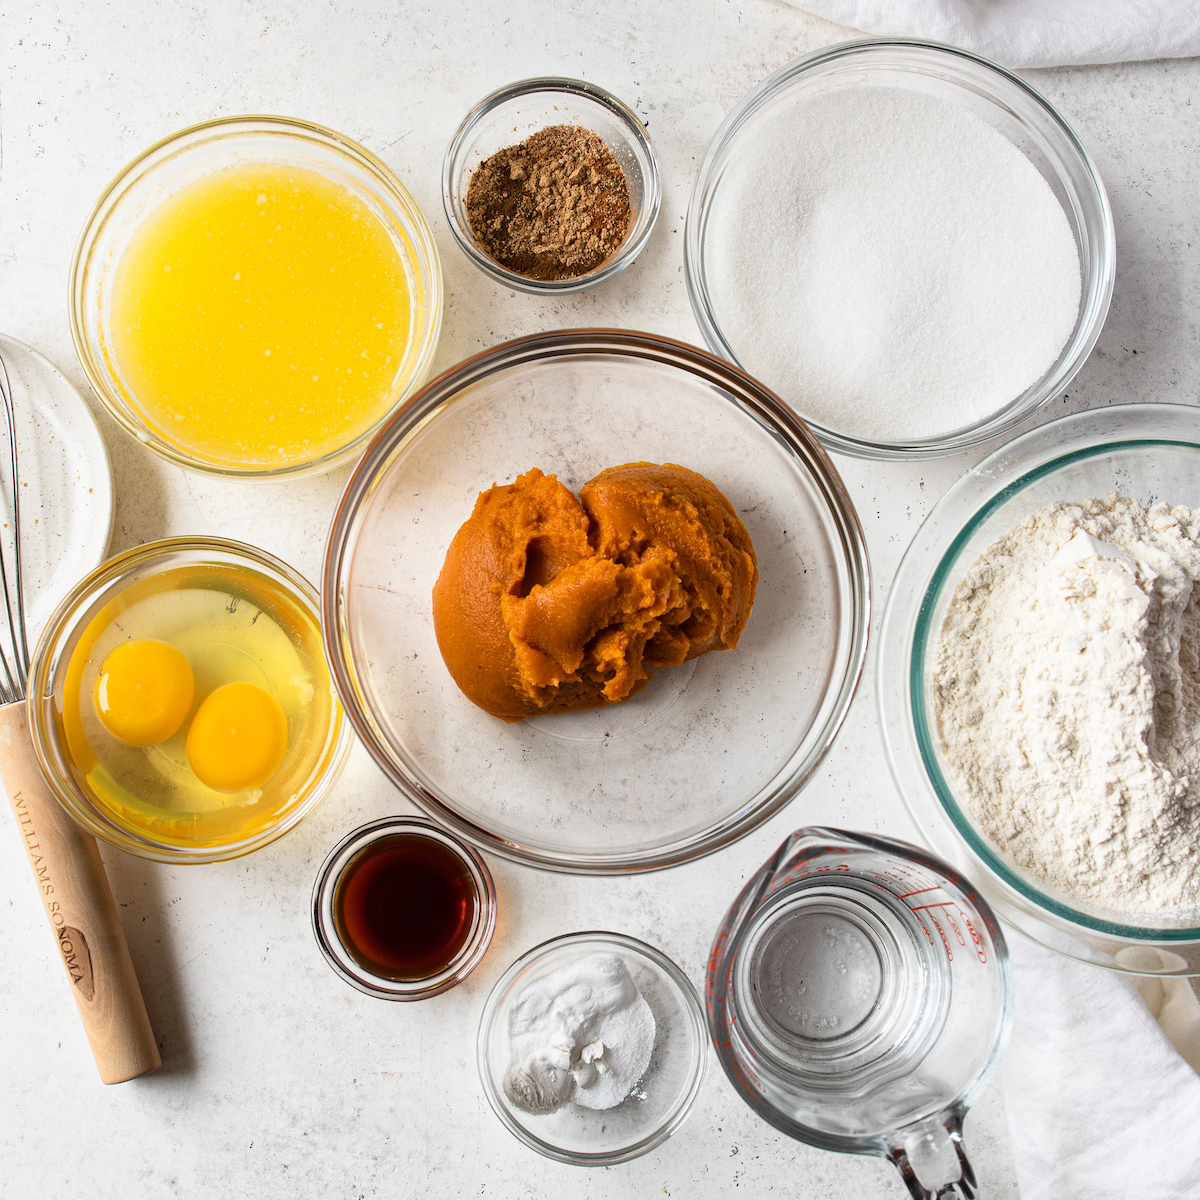 All of the ingredients to make a spiced pumpkin loaf.